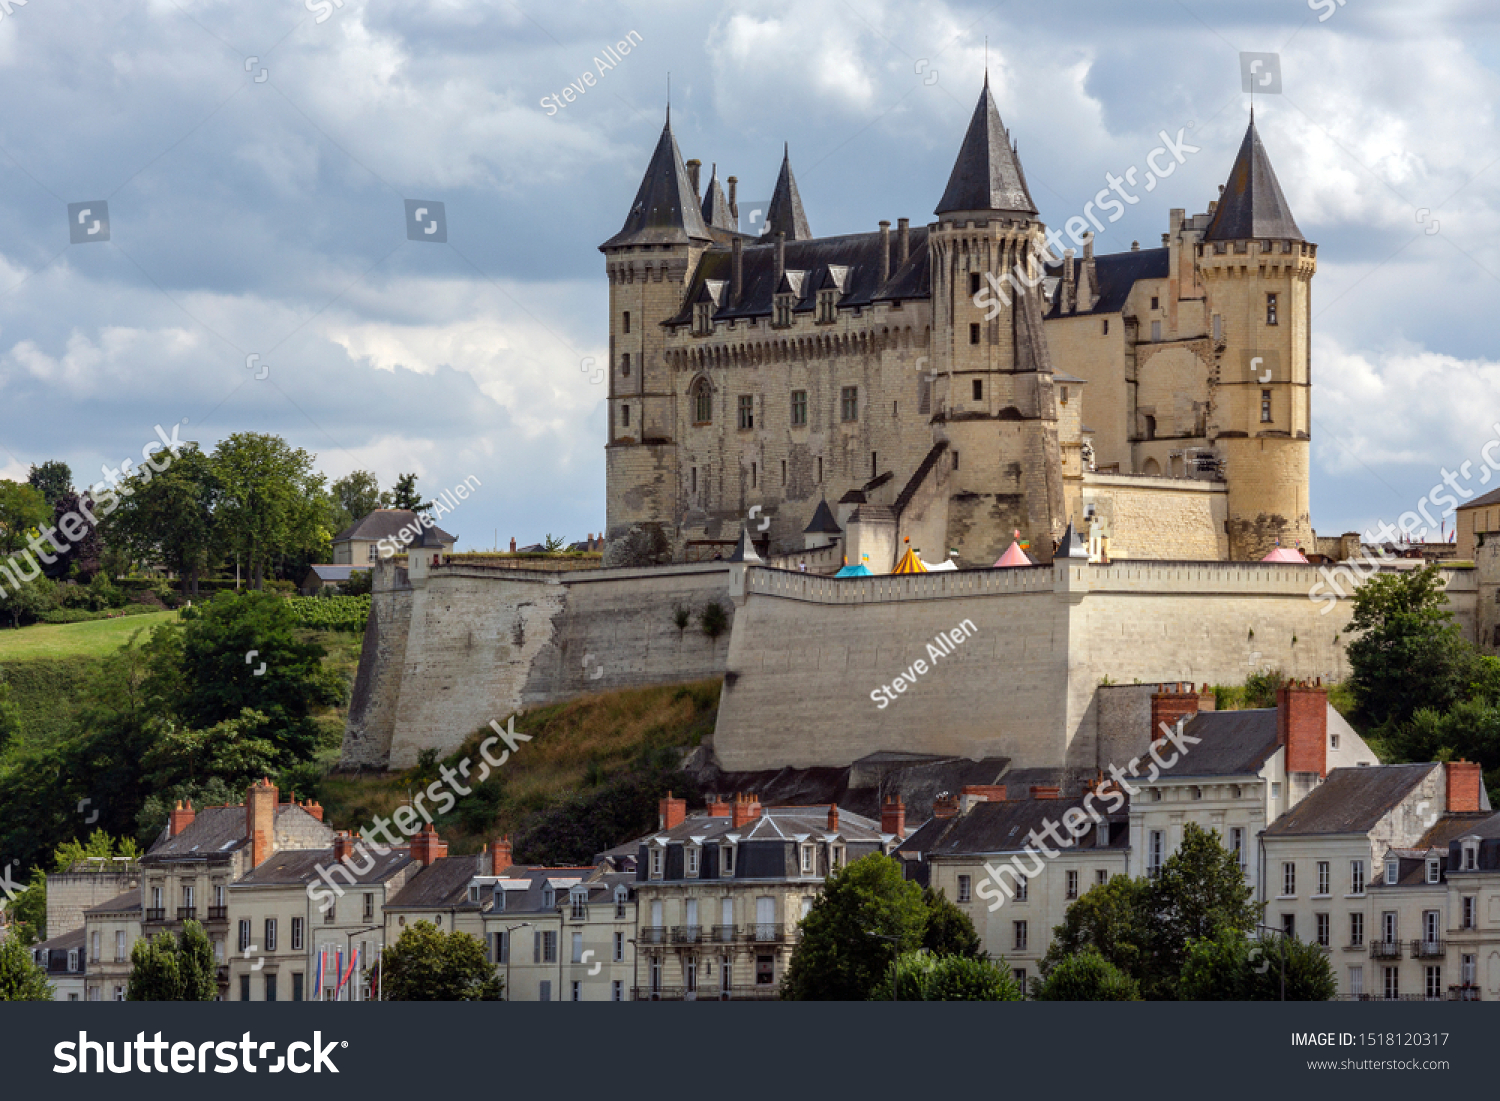 Chateau de Saumur in the Loire Valley, France. Originally built as a castle in the 10th century as a fortified stronghold against Norman attacks. It was later developed into a chateau. #1518120317